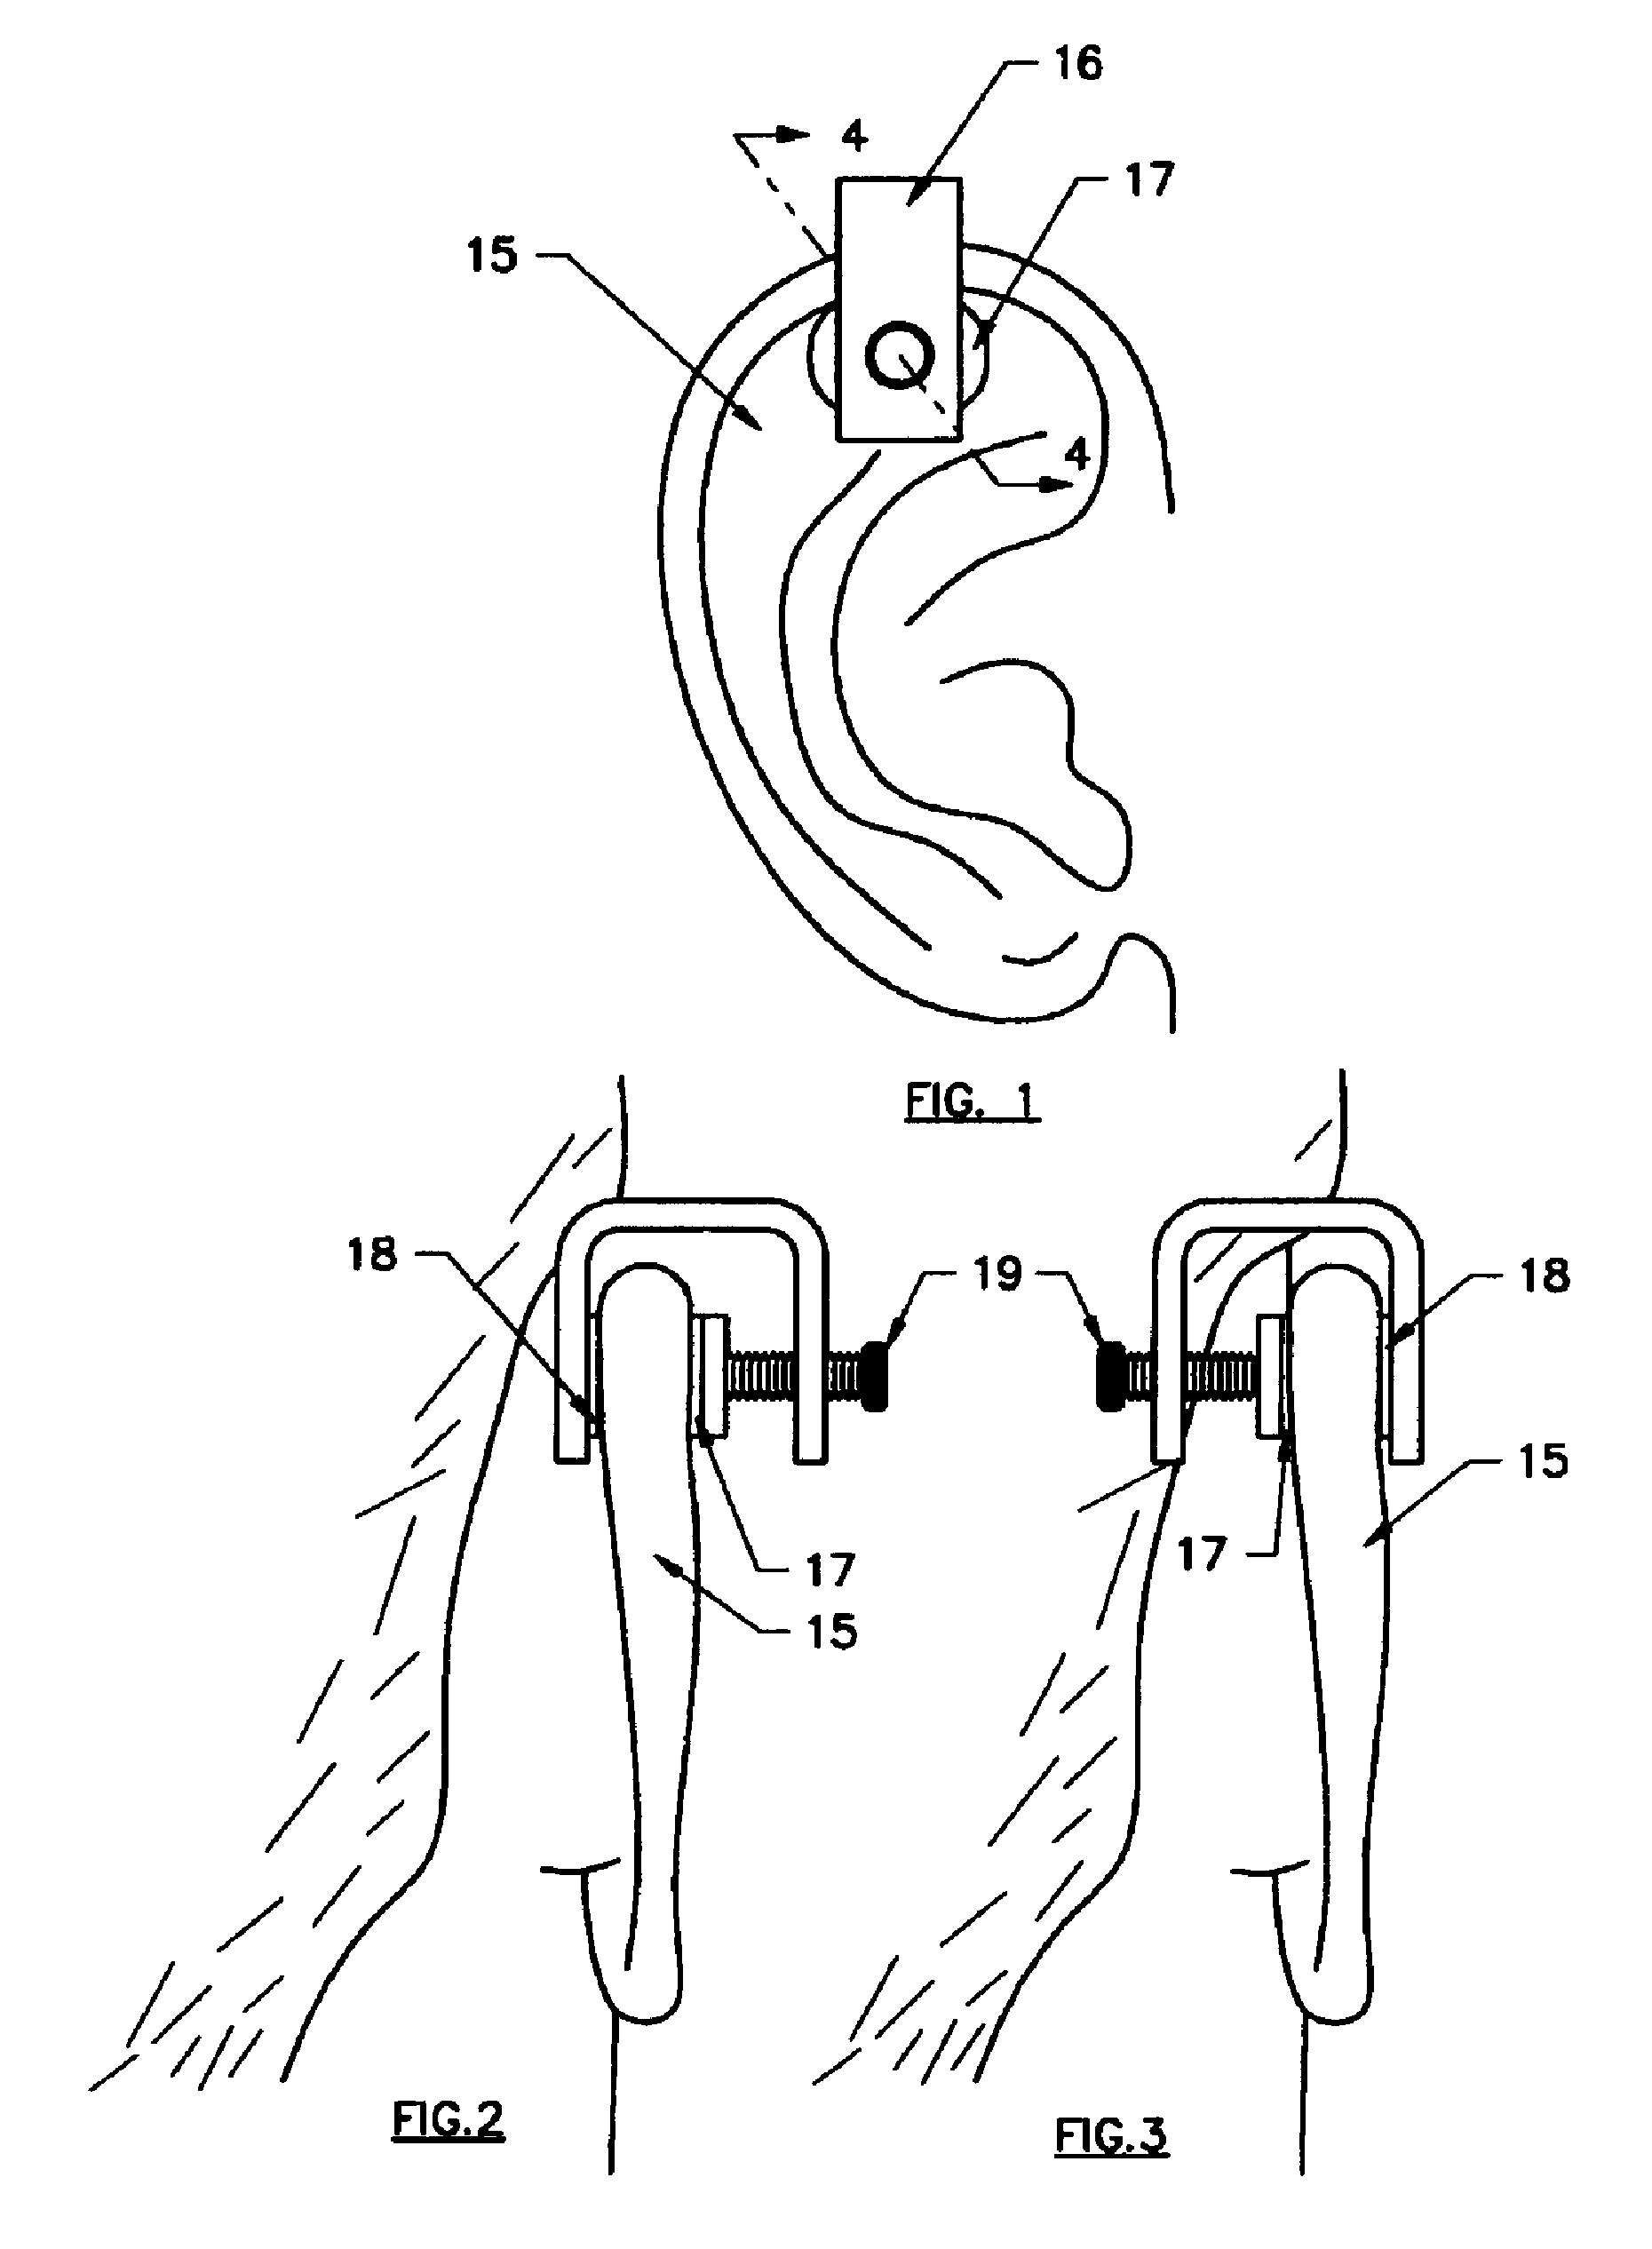 Device and Method for Treating Ear Injuries